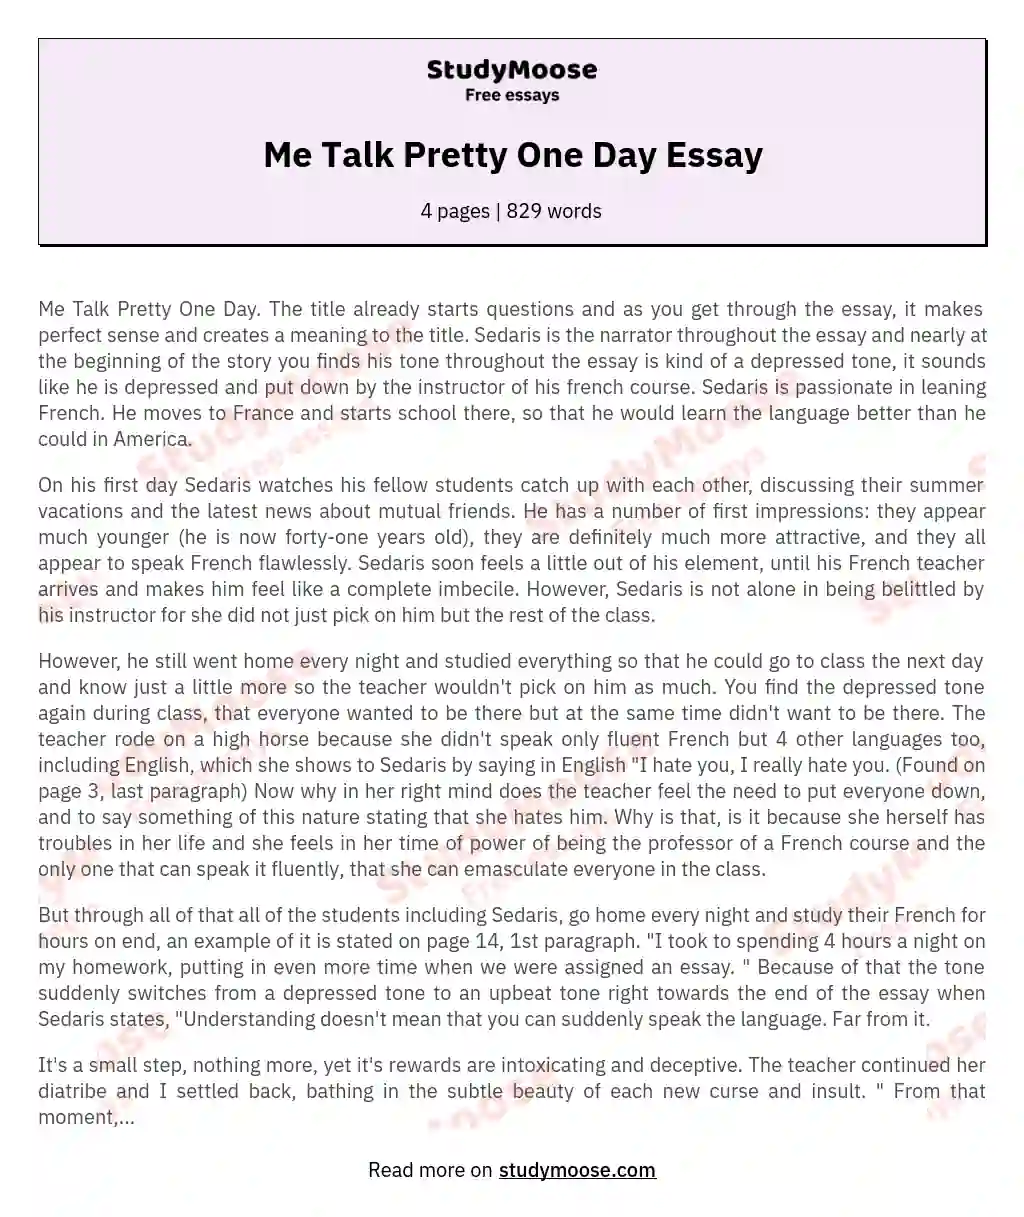 me talk pretty one day essay discussion questions